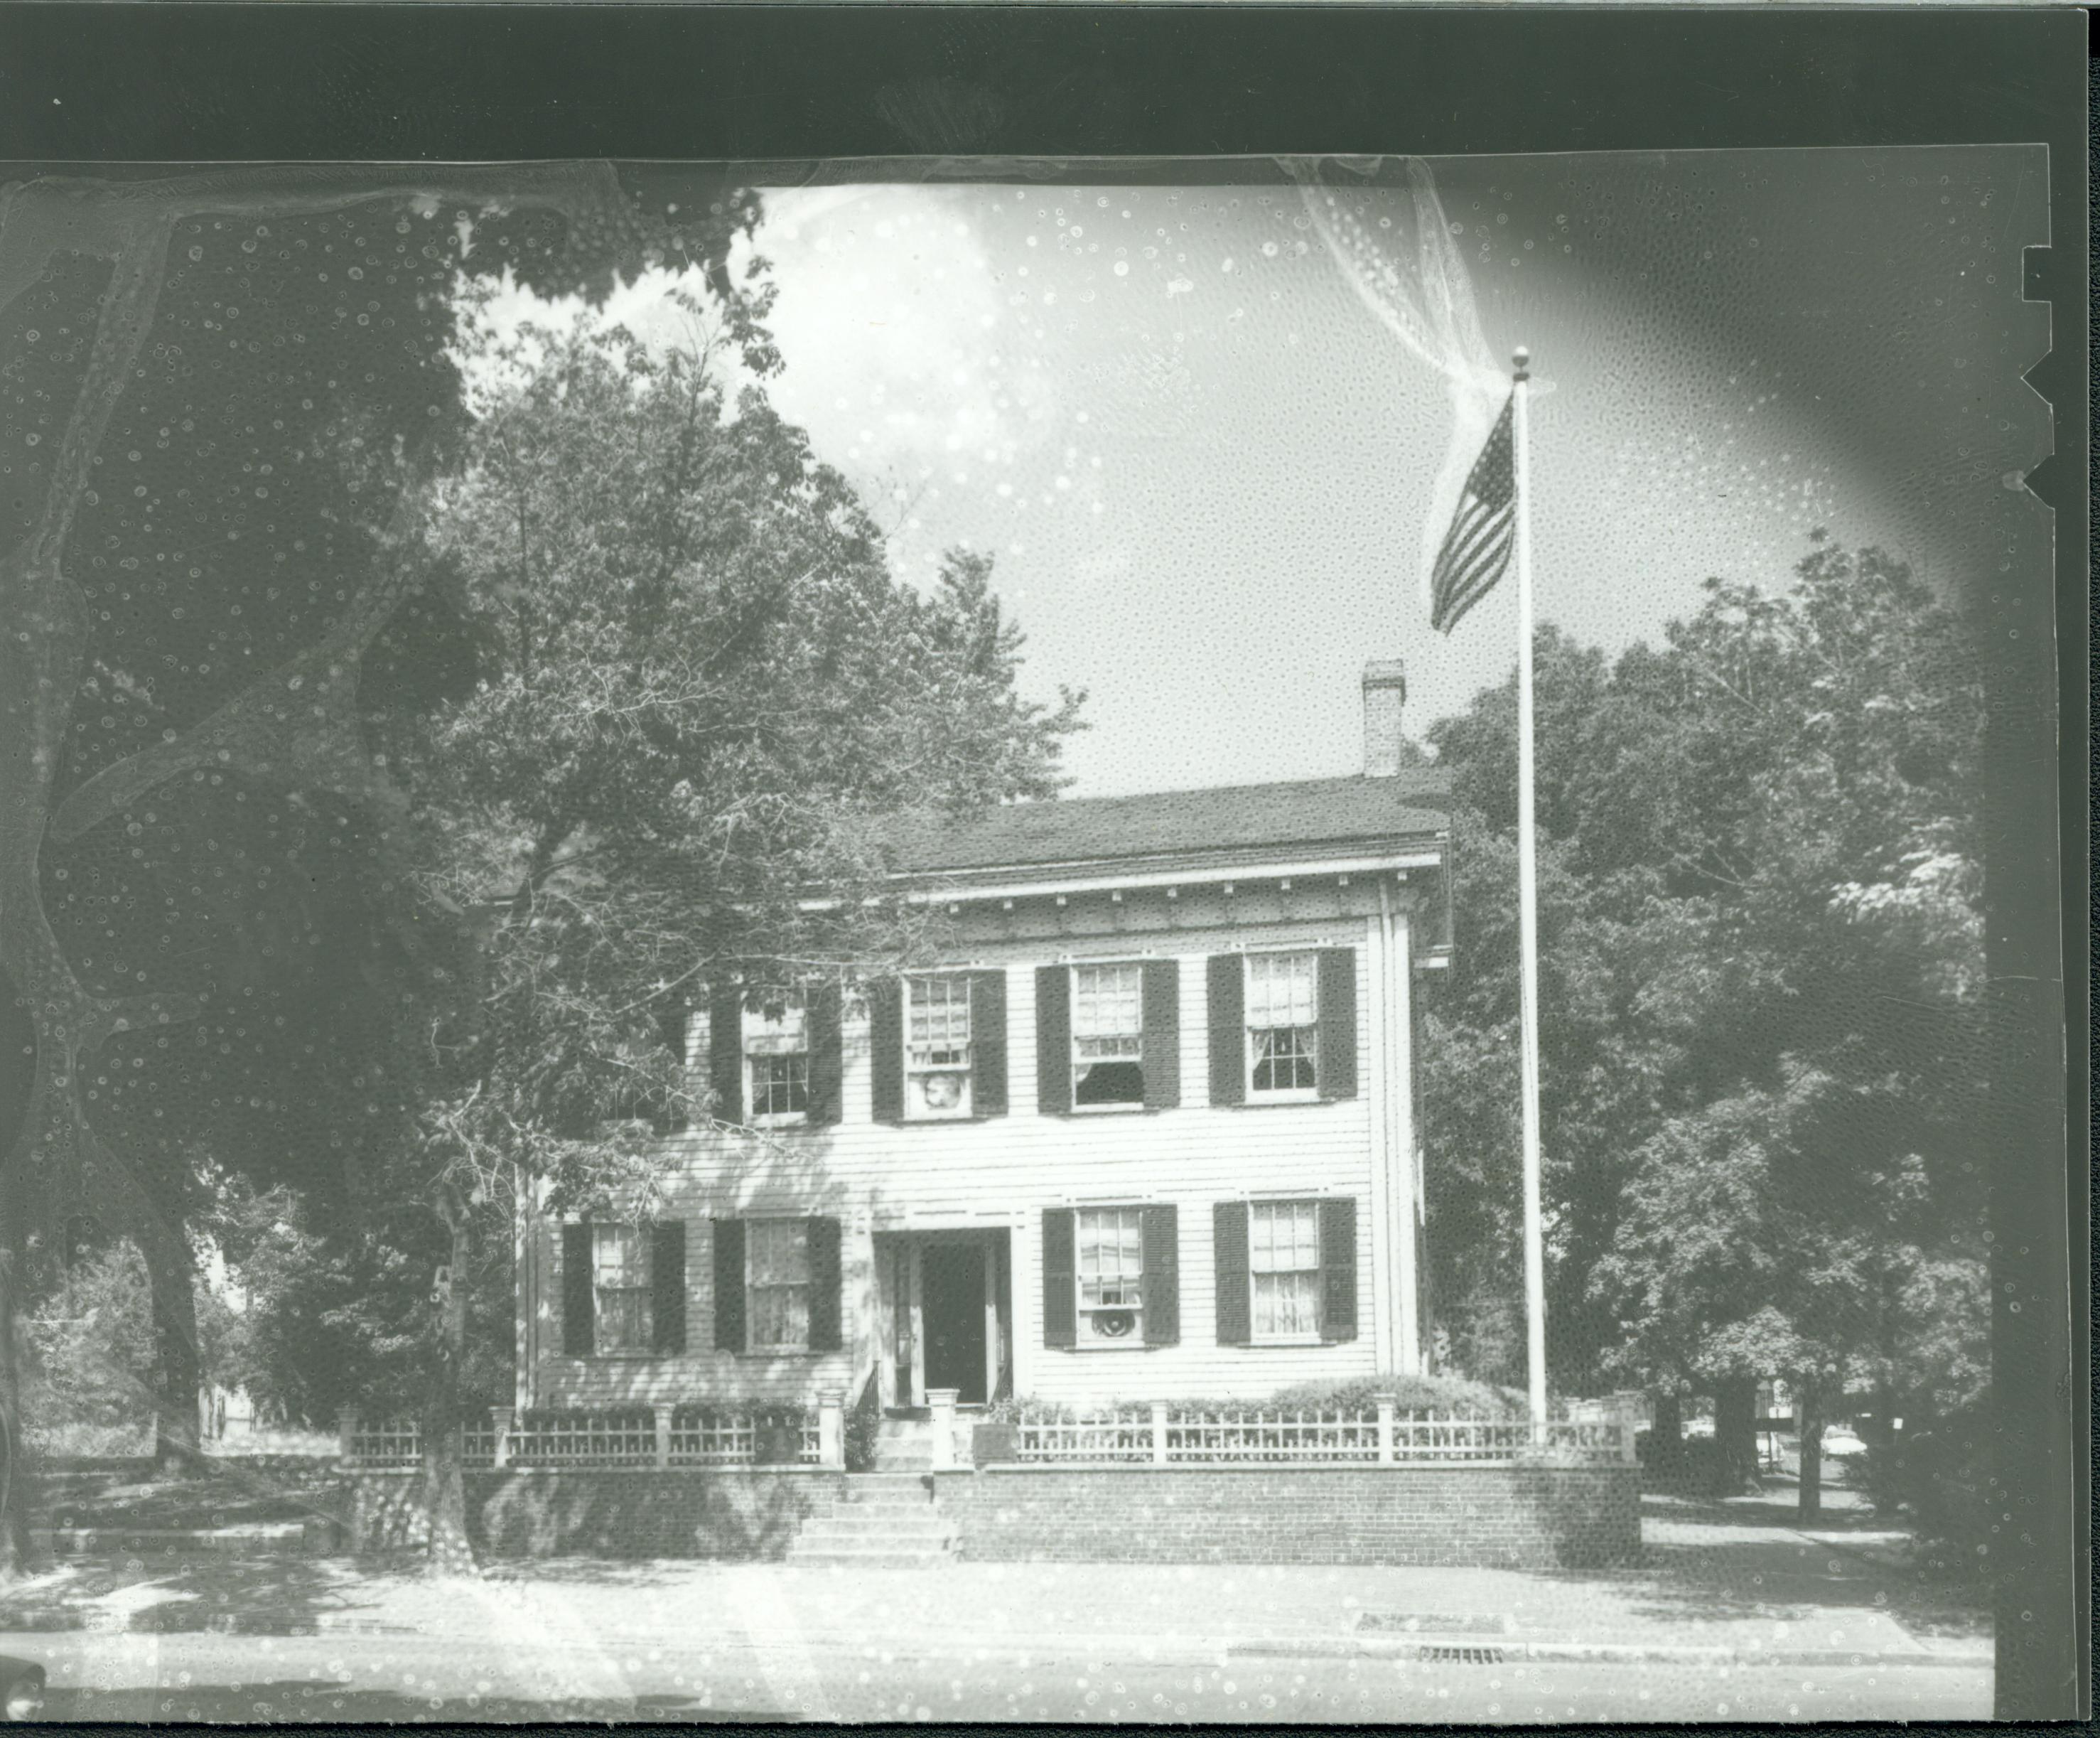 Lincoln Home west (front) elevation in summer surrounded by trees, flagpole in corner behind picket fence. Windows are open without screens, a box fan is visible in upper center window and lower right window. Looking East from 8th Street. Negative deteriorating Lincoln Home, summer, flagpole, 8th Street